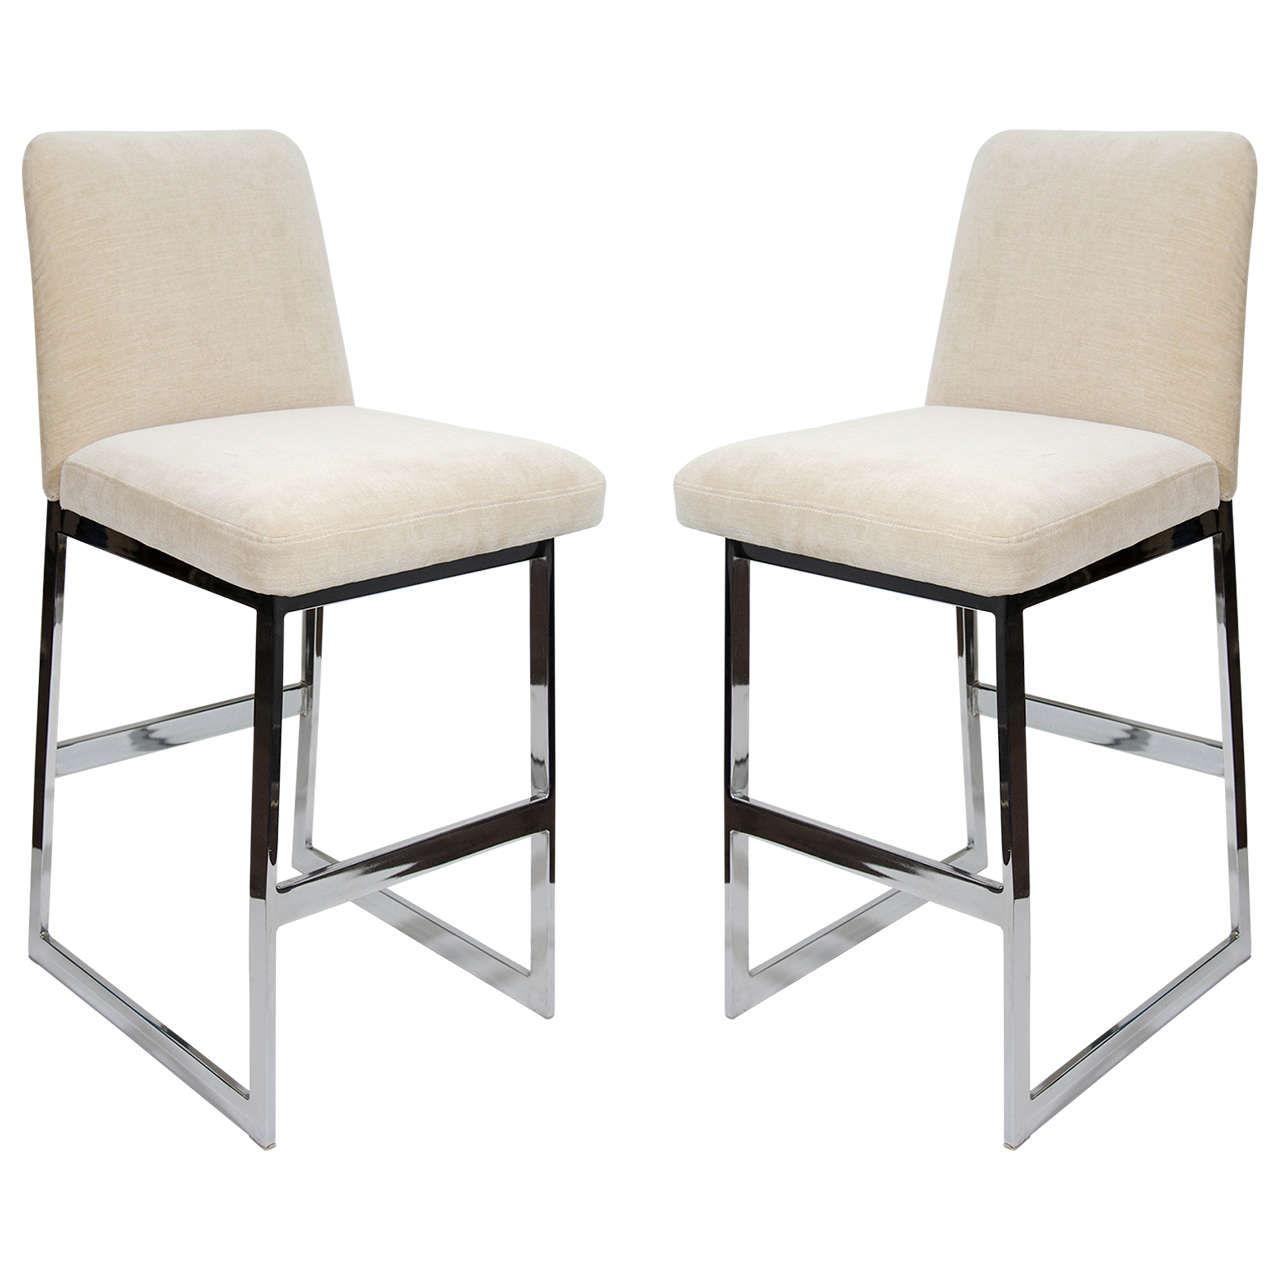 Pair of Luxe Mid Century Modern Upholstered Counter Stools